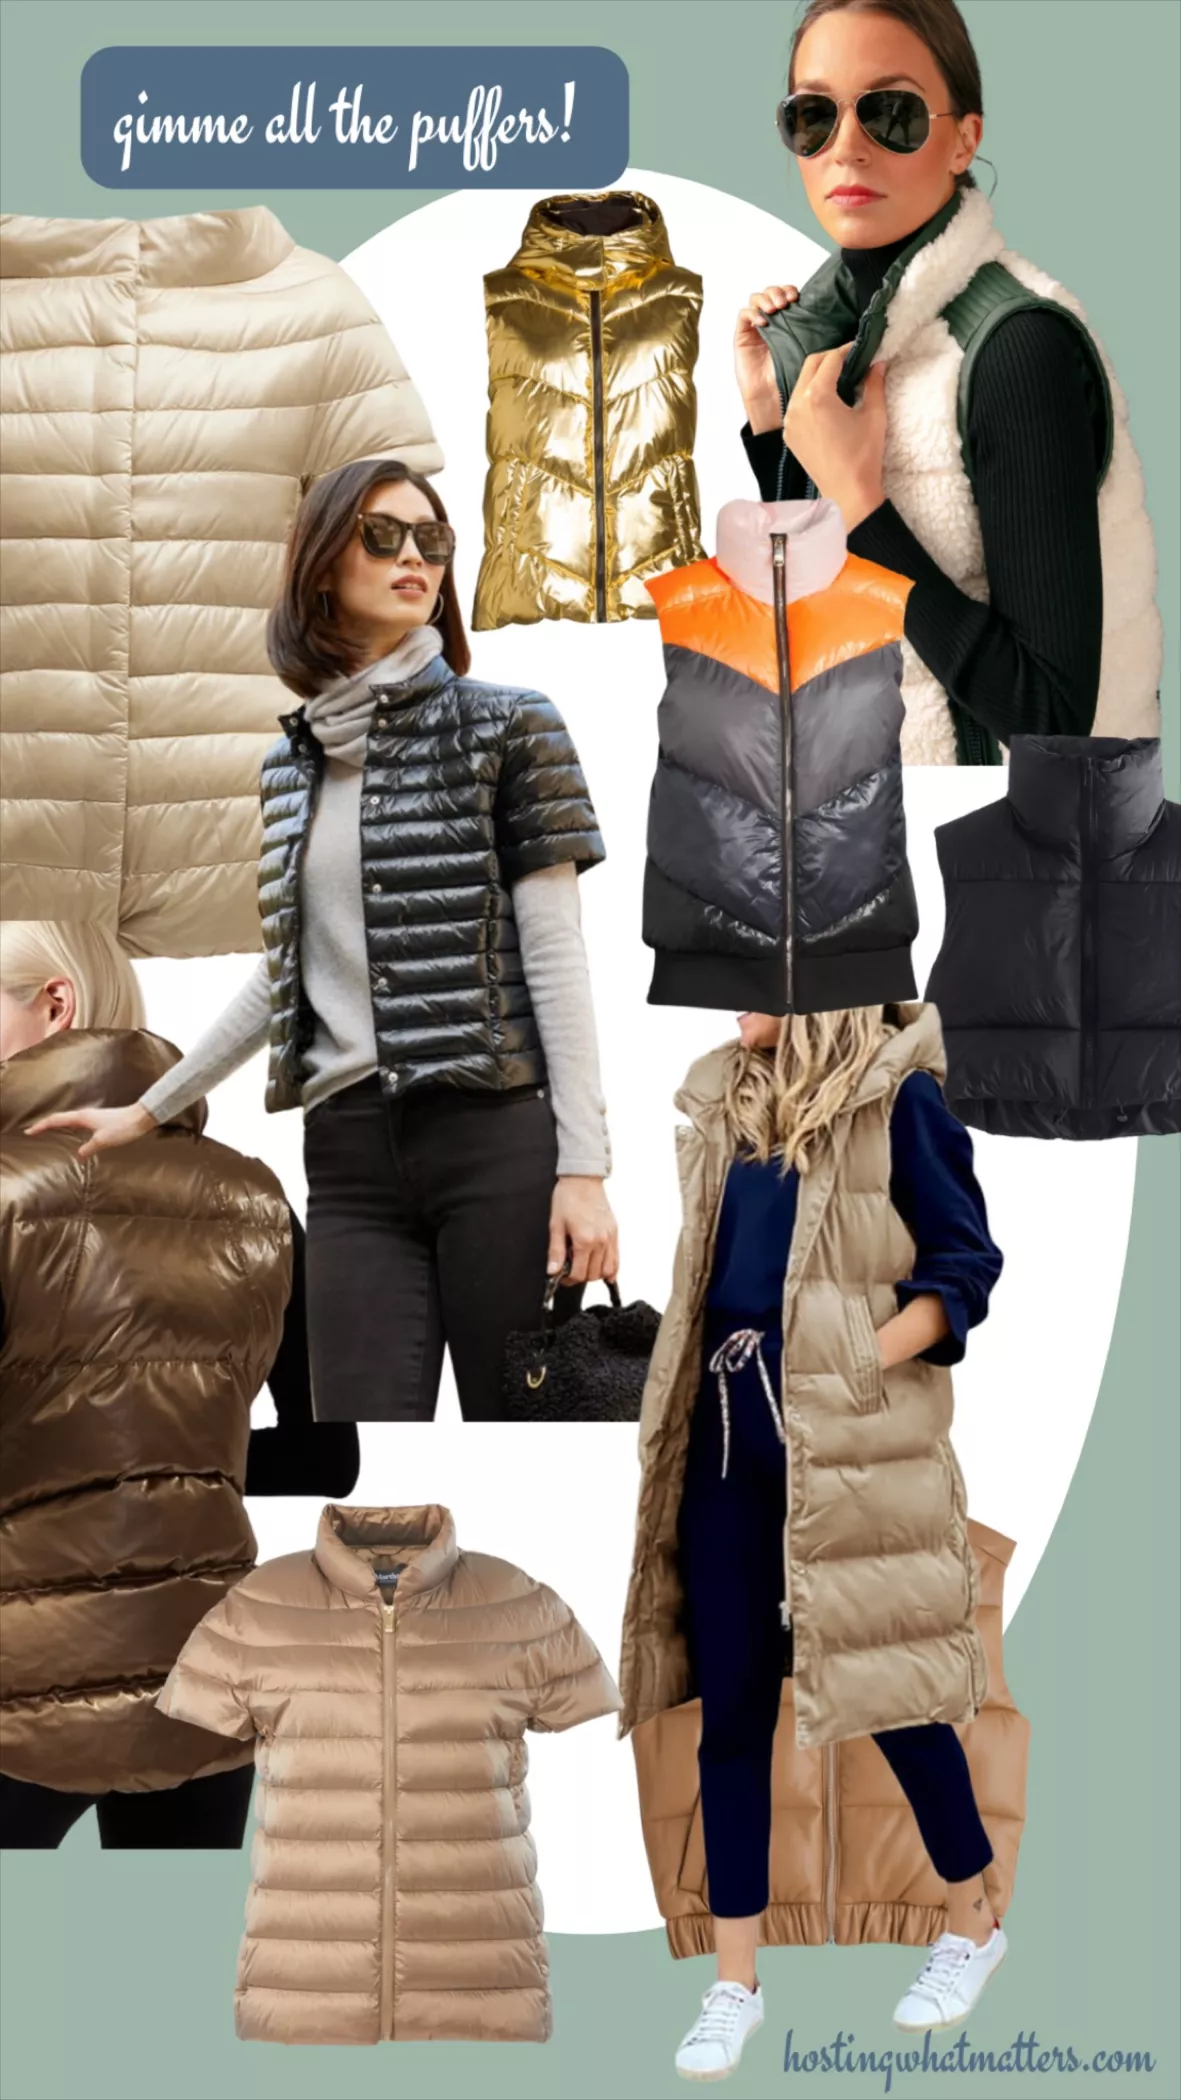 Cropped Puffer Vest curated on LTK